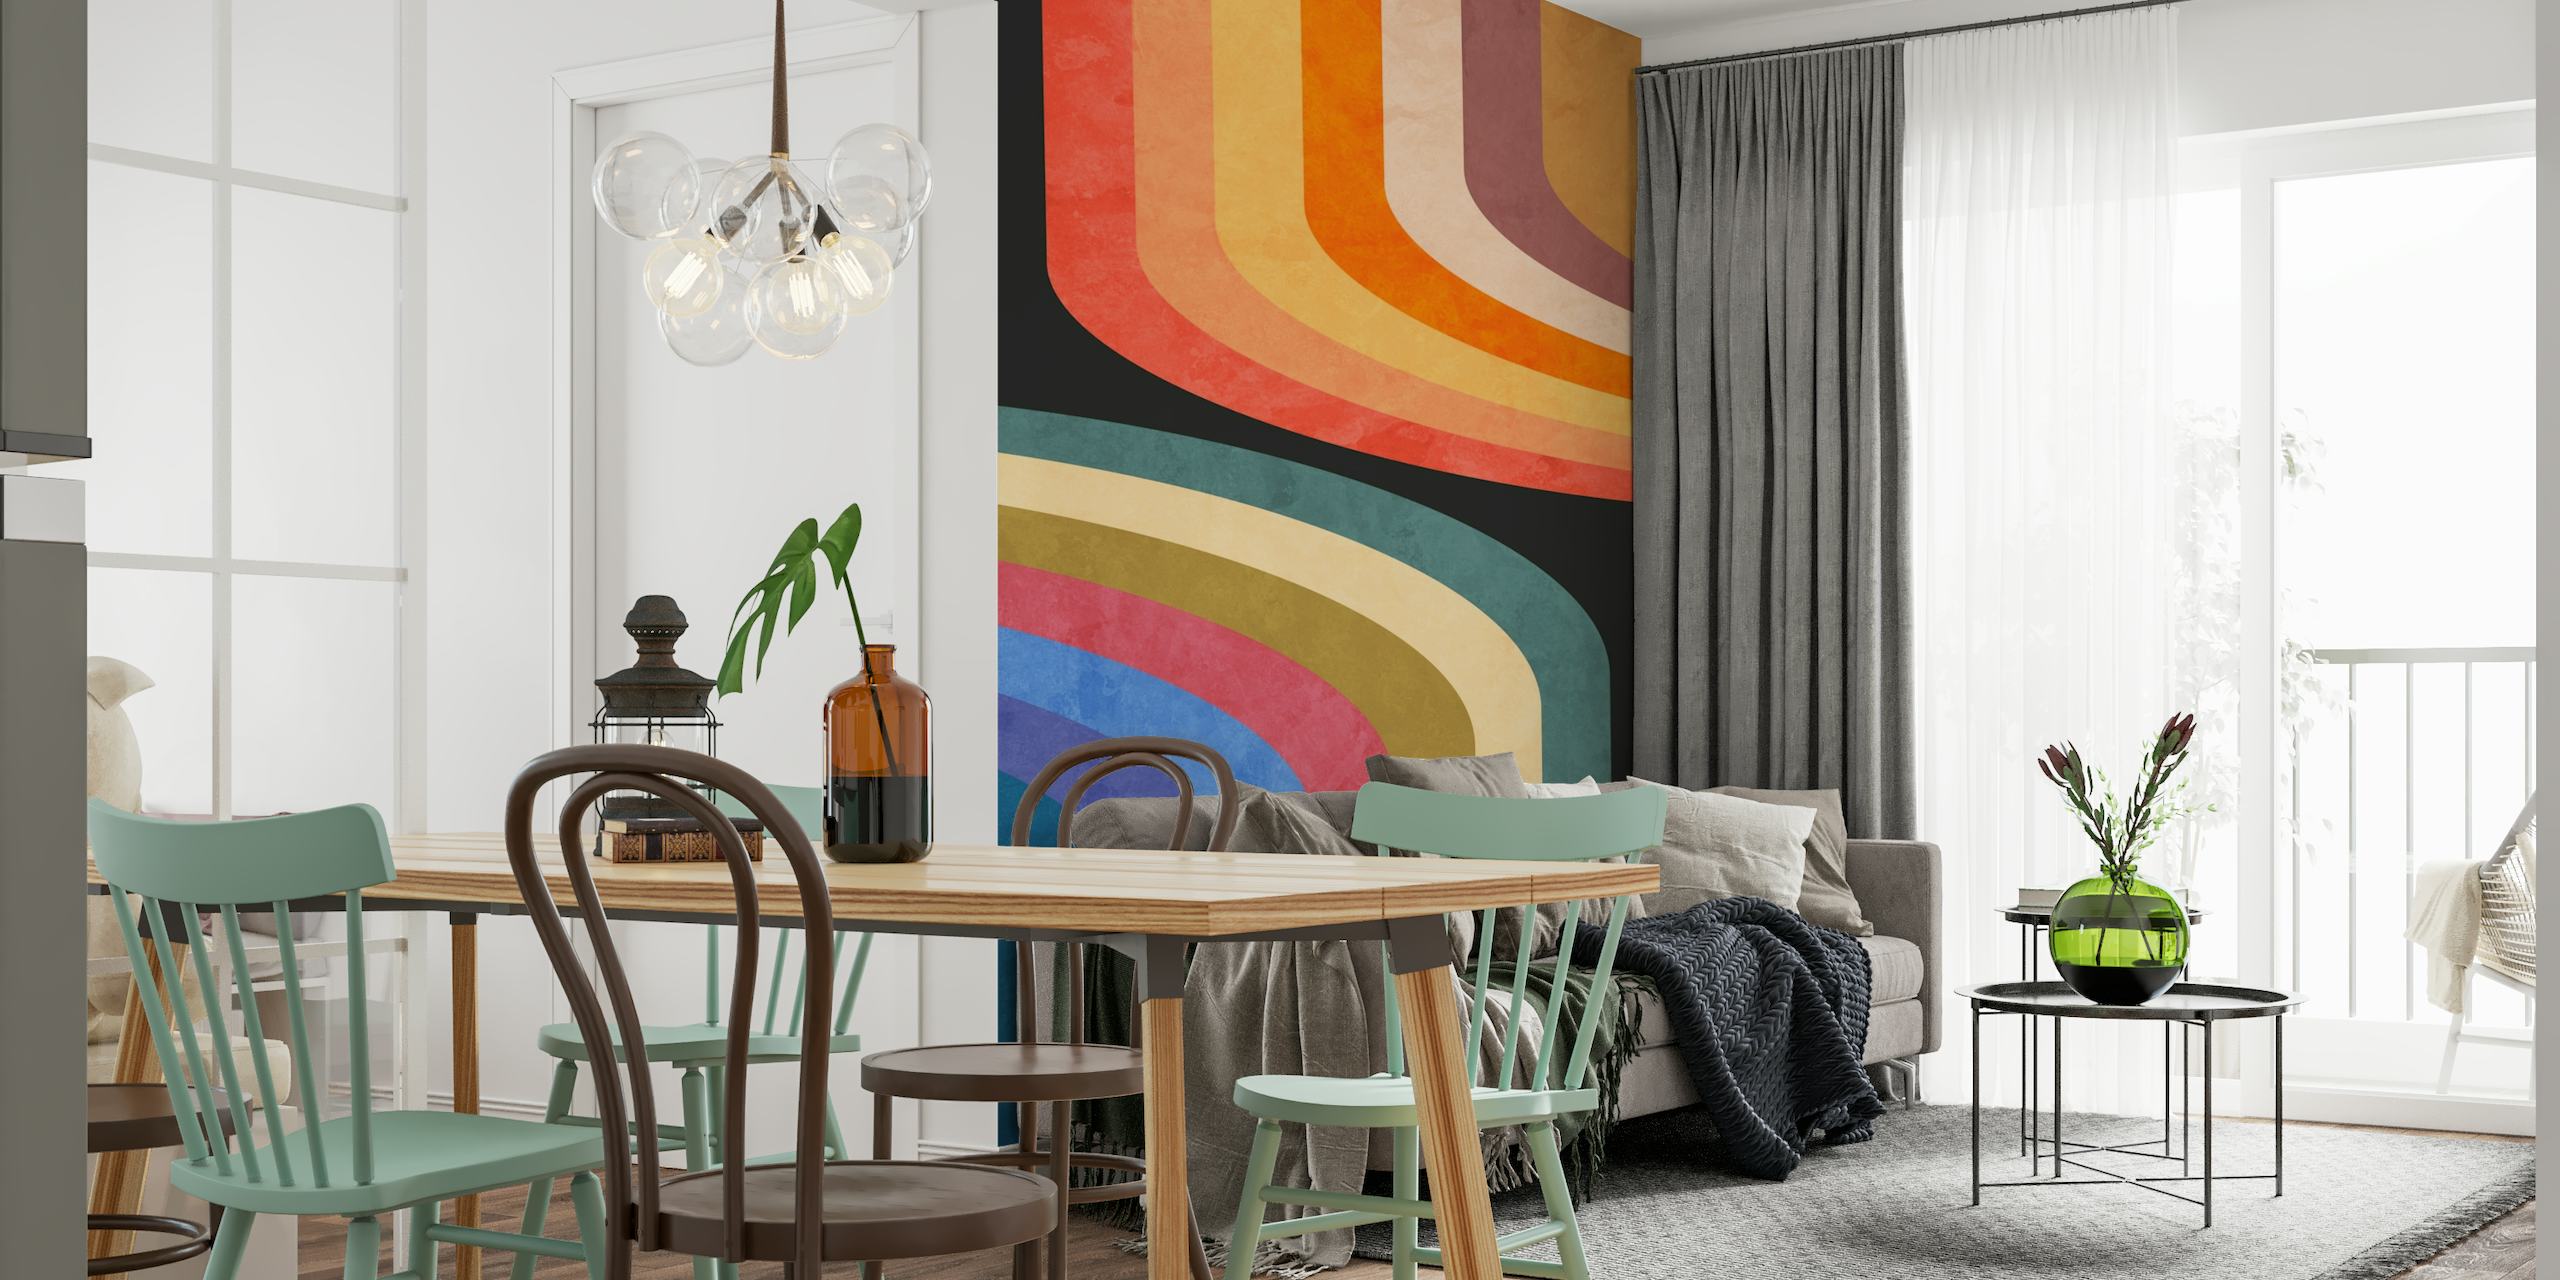 Abstract colorful arches wall mural with rainbow-inspired design